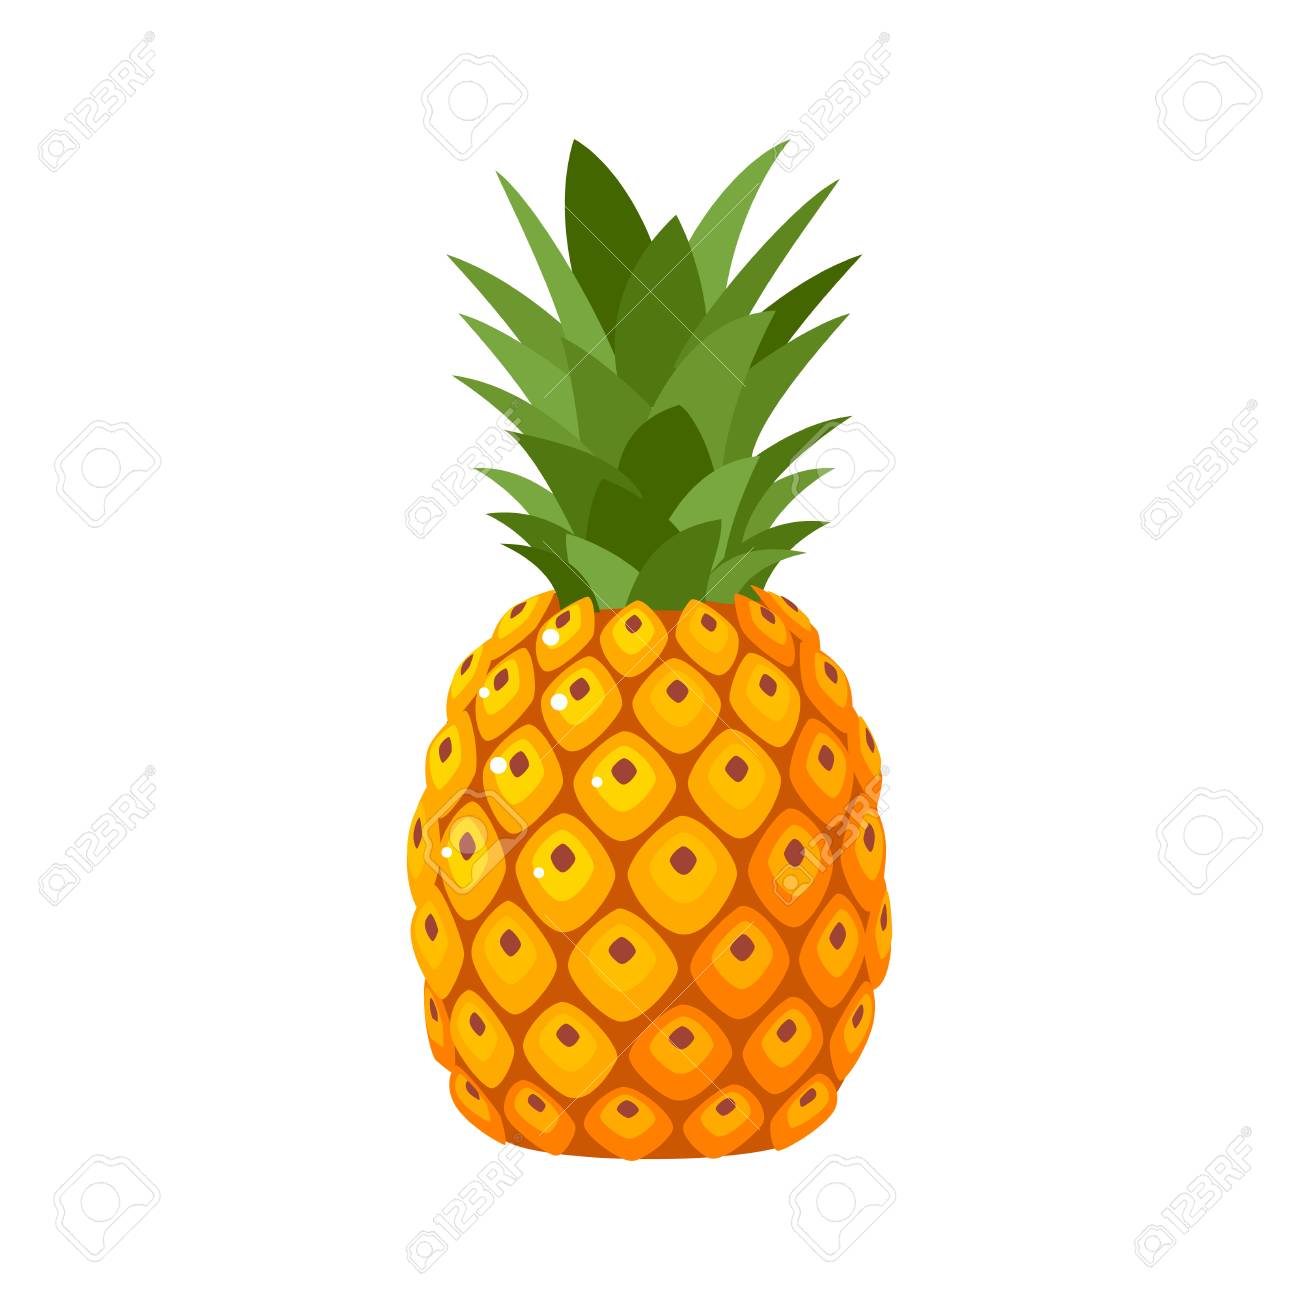 Detail Picture Of A Pineapple Fruit Nomer 15